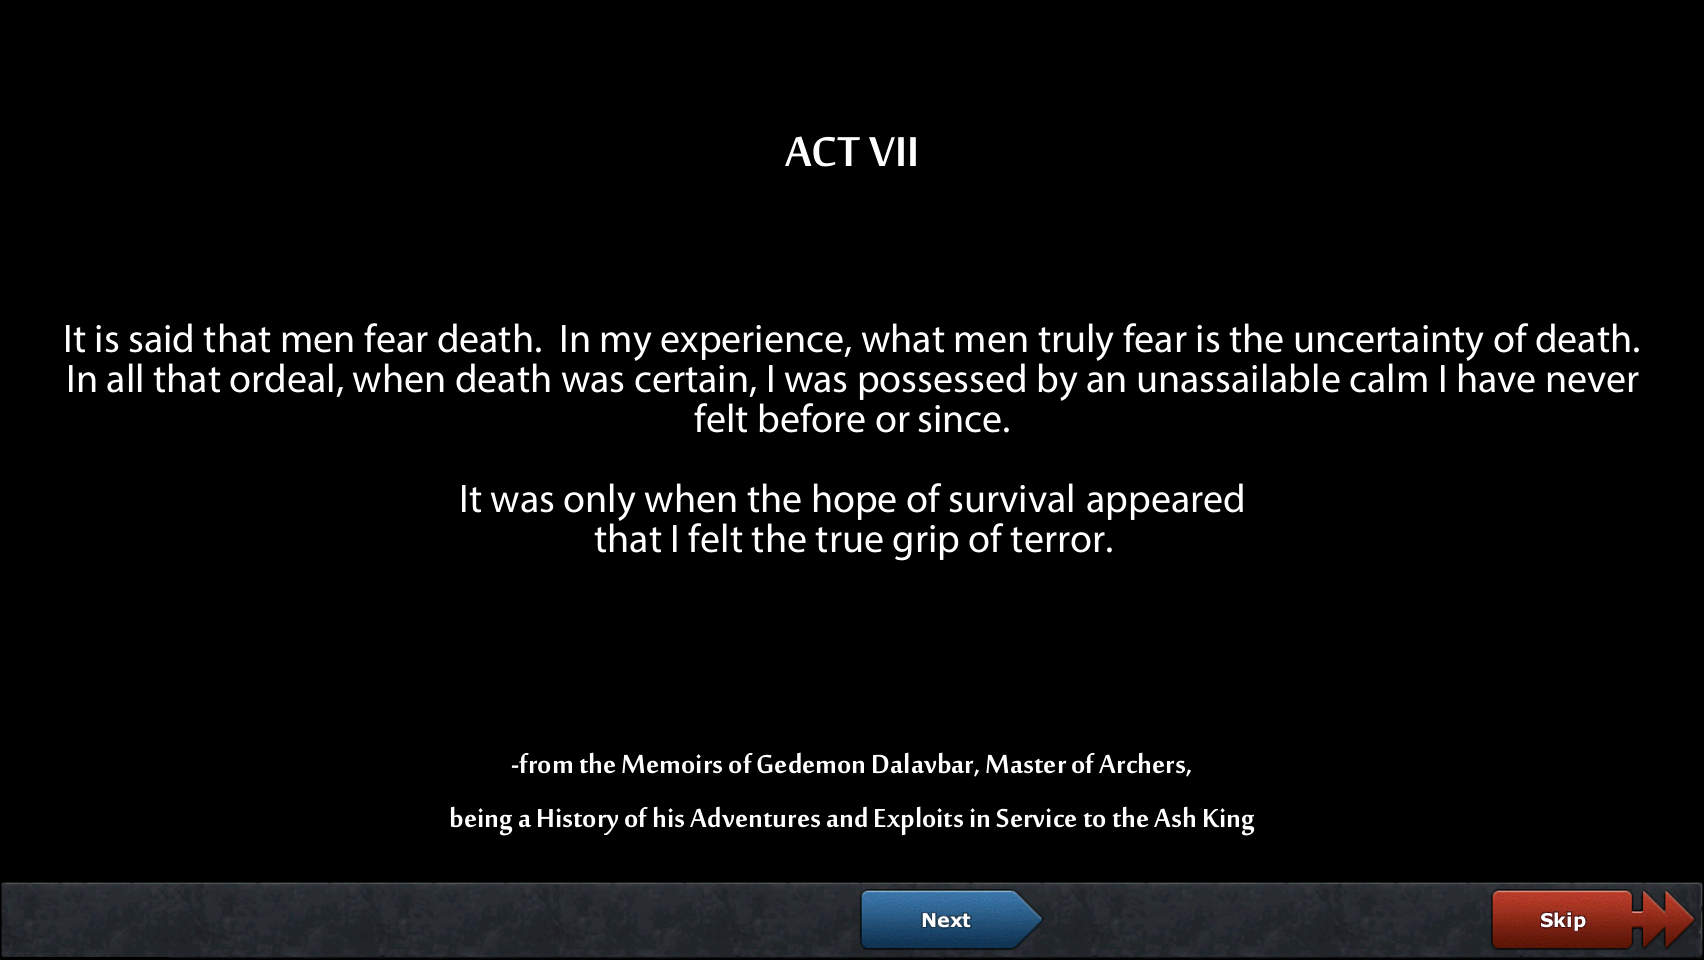 Act VII: It is said that men fear death. In my experience, what men truly fear is the uncertainty of death. In all that ordeal, when death was certain, I was possessed by an unassailable calm I have never felt before or since. It was only when the hope of survival appeared that I felt the true grip of terror. - from the Memoirs of Gedemon Dalavbar, Master of Archers, being a History of his Adventures and Exploits in Service to the Ash King